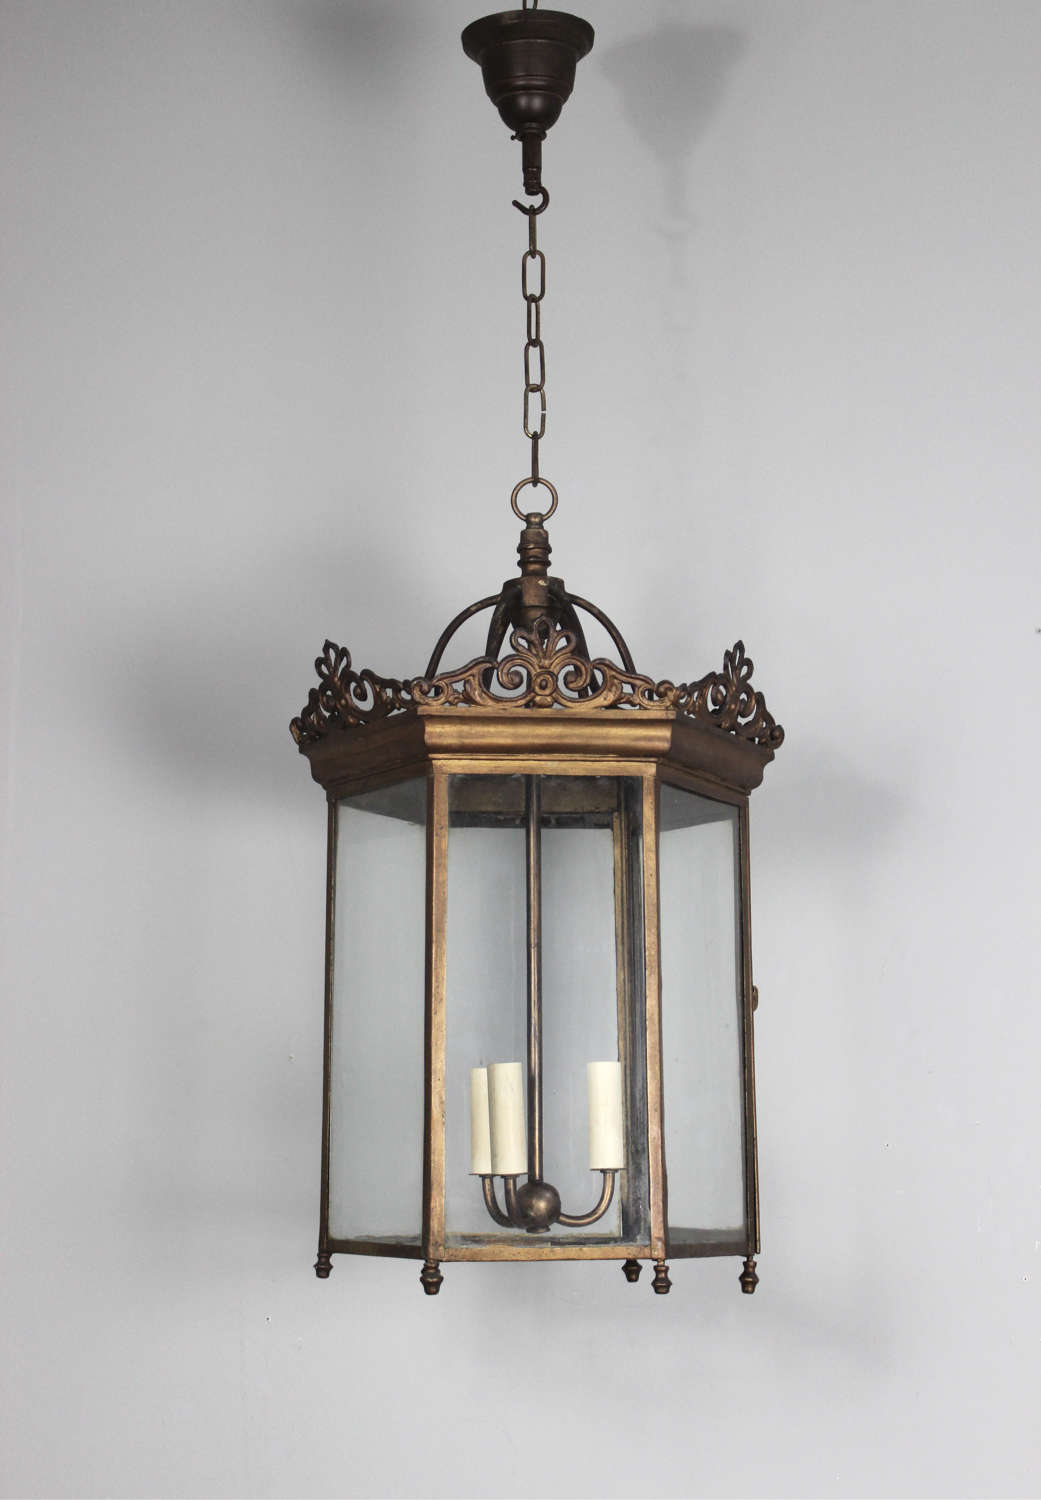 Six sided late 19th C Italian hall lantern formerly for gas